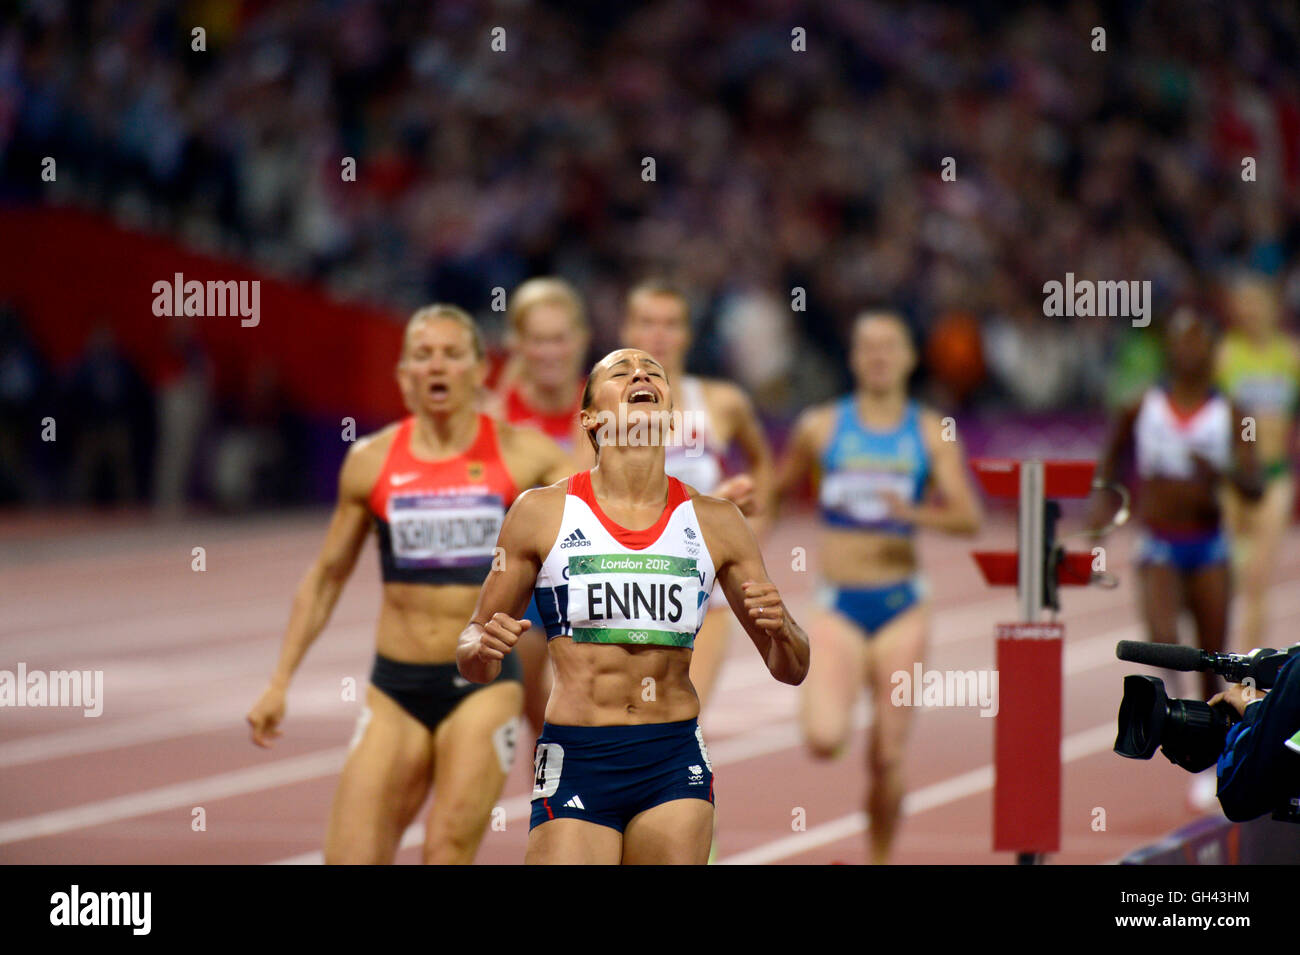 Jessica Ennis of Great Britain after winning the gold medal in the Heptathlon during the London Olympics. Stock Photo